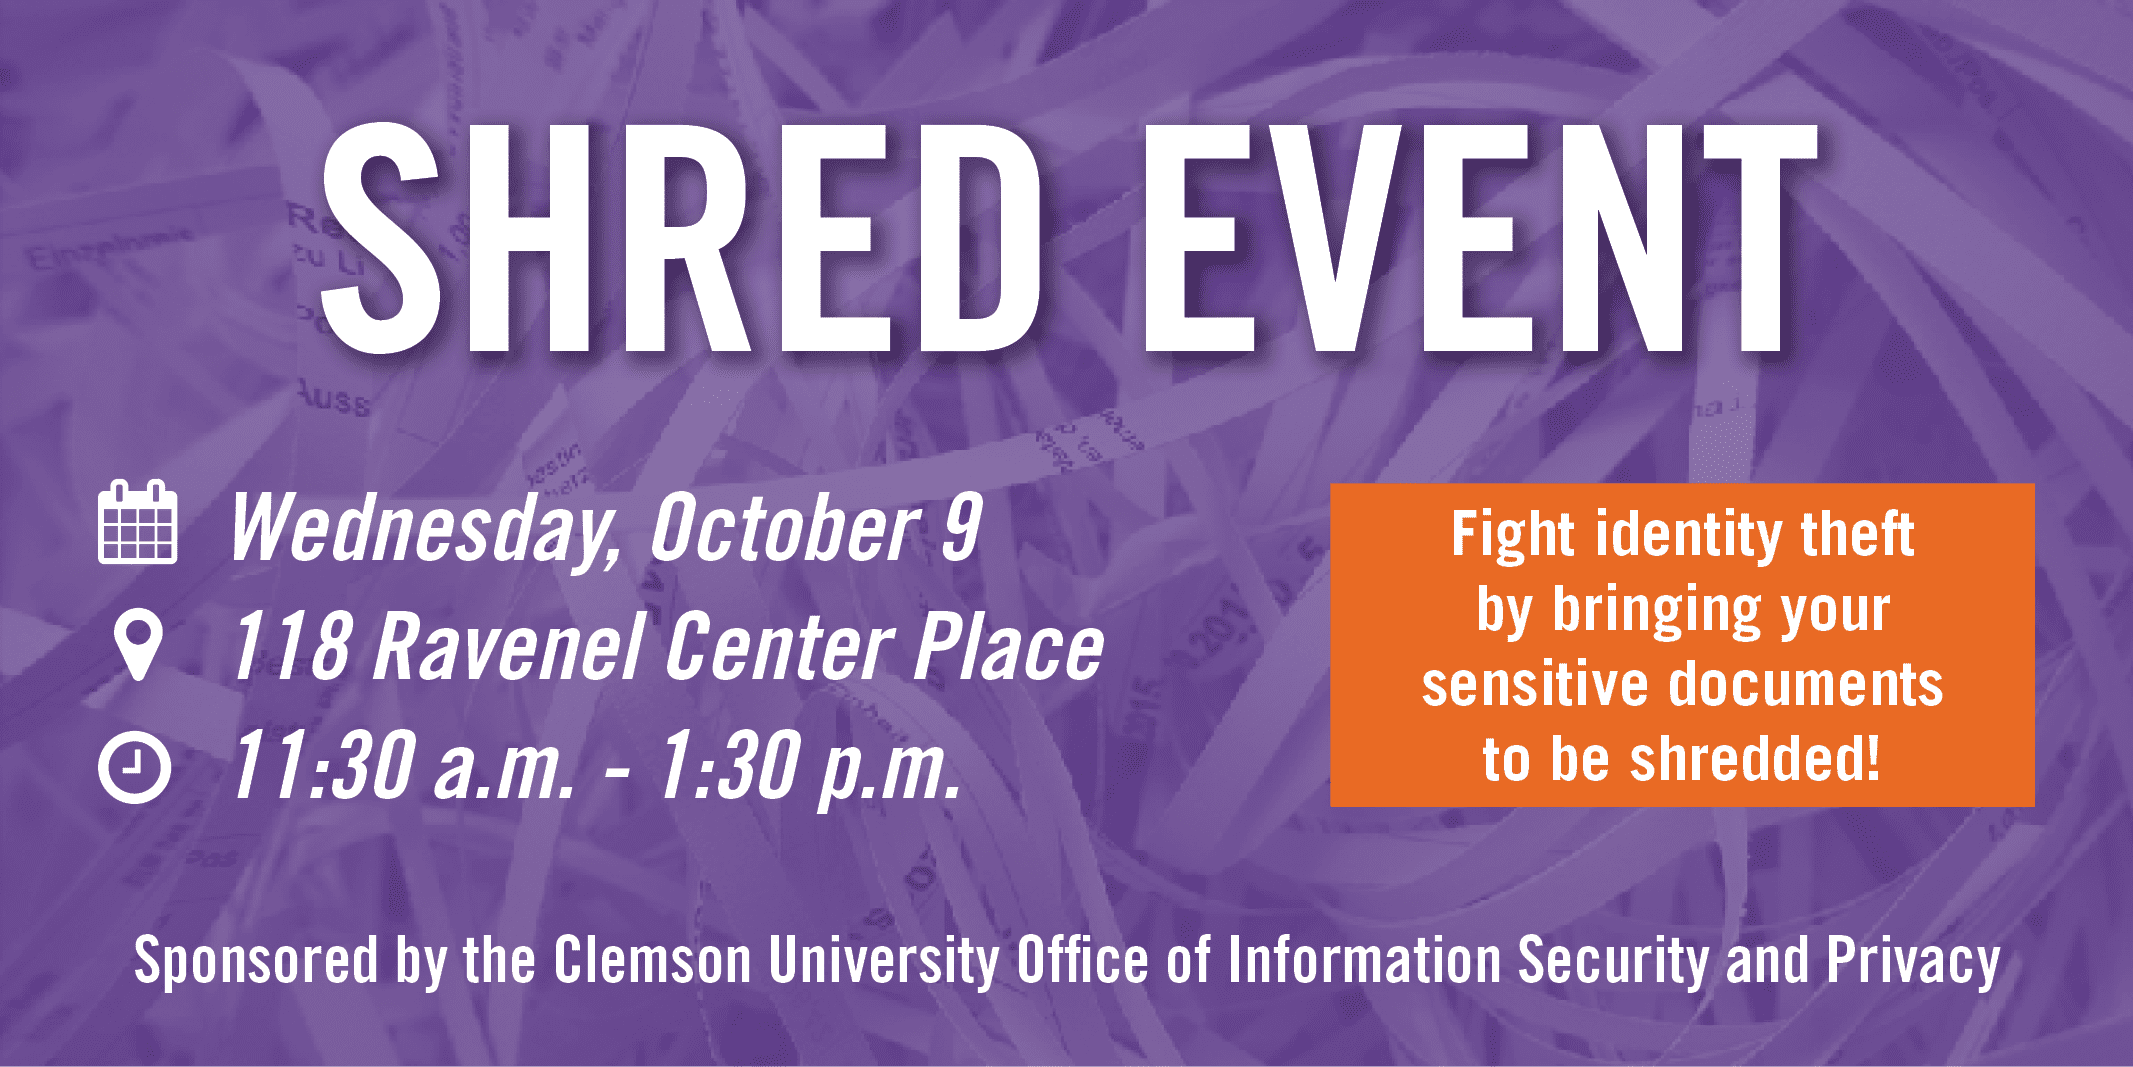 Members of the public can bring their sensitive documents to be shredded free of charge.